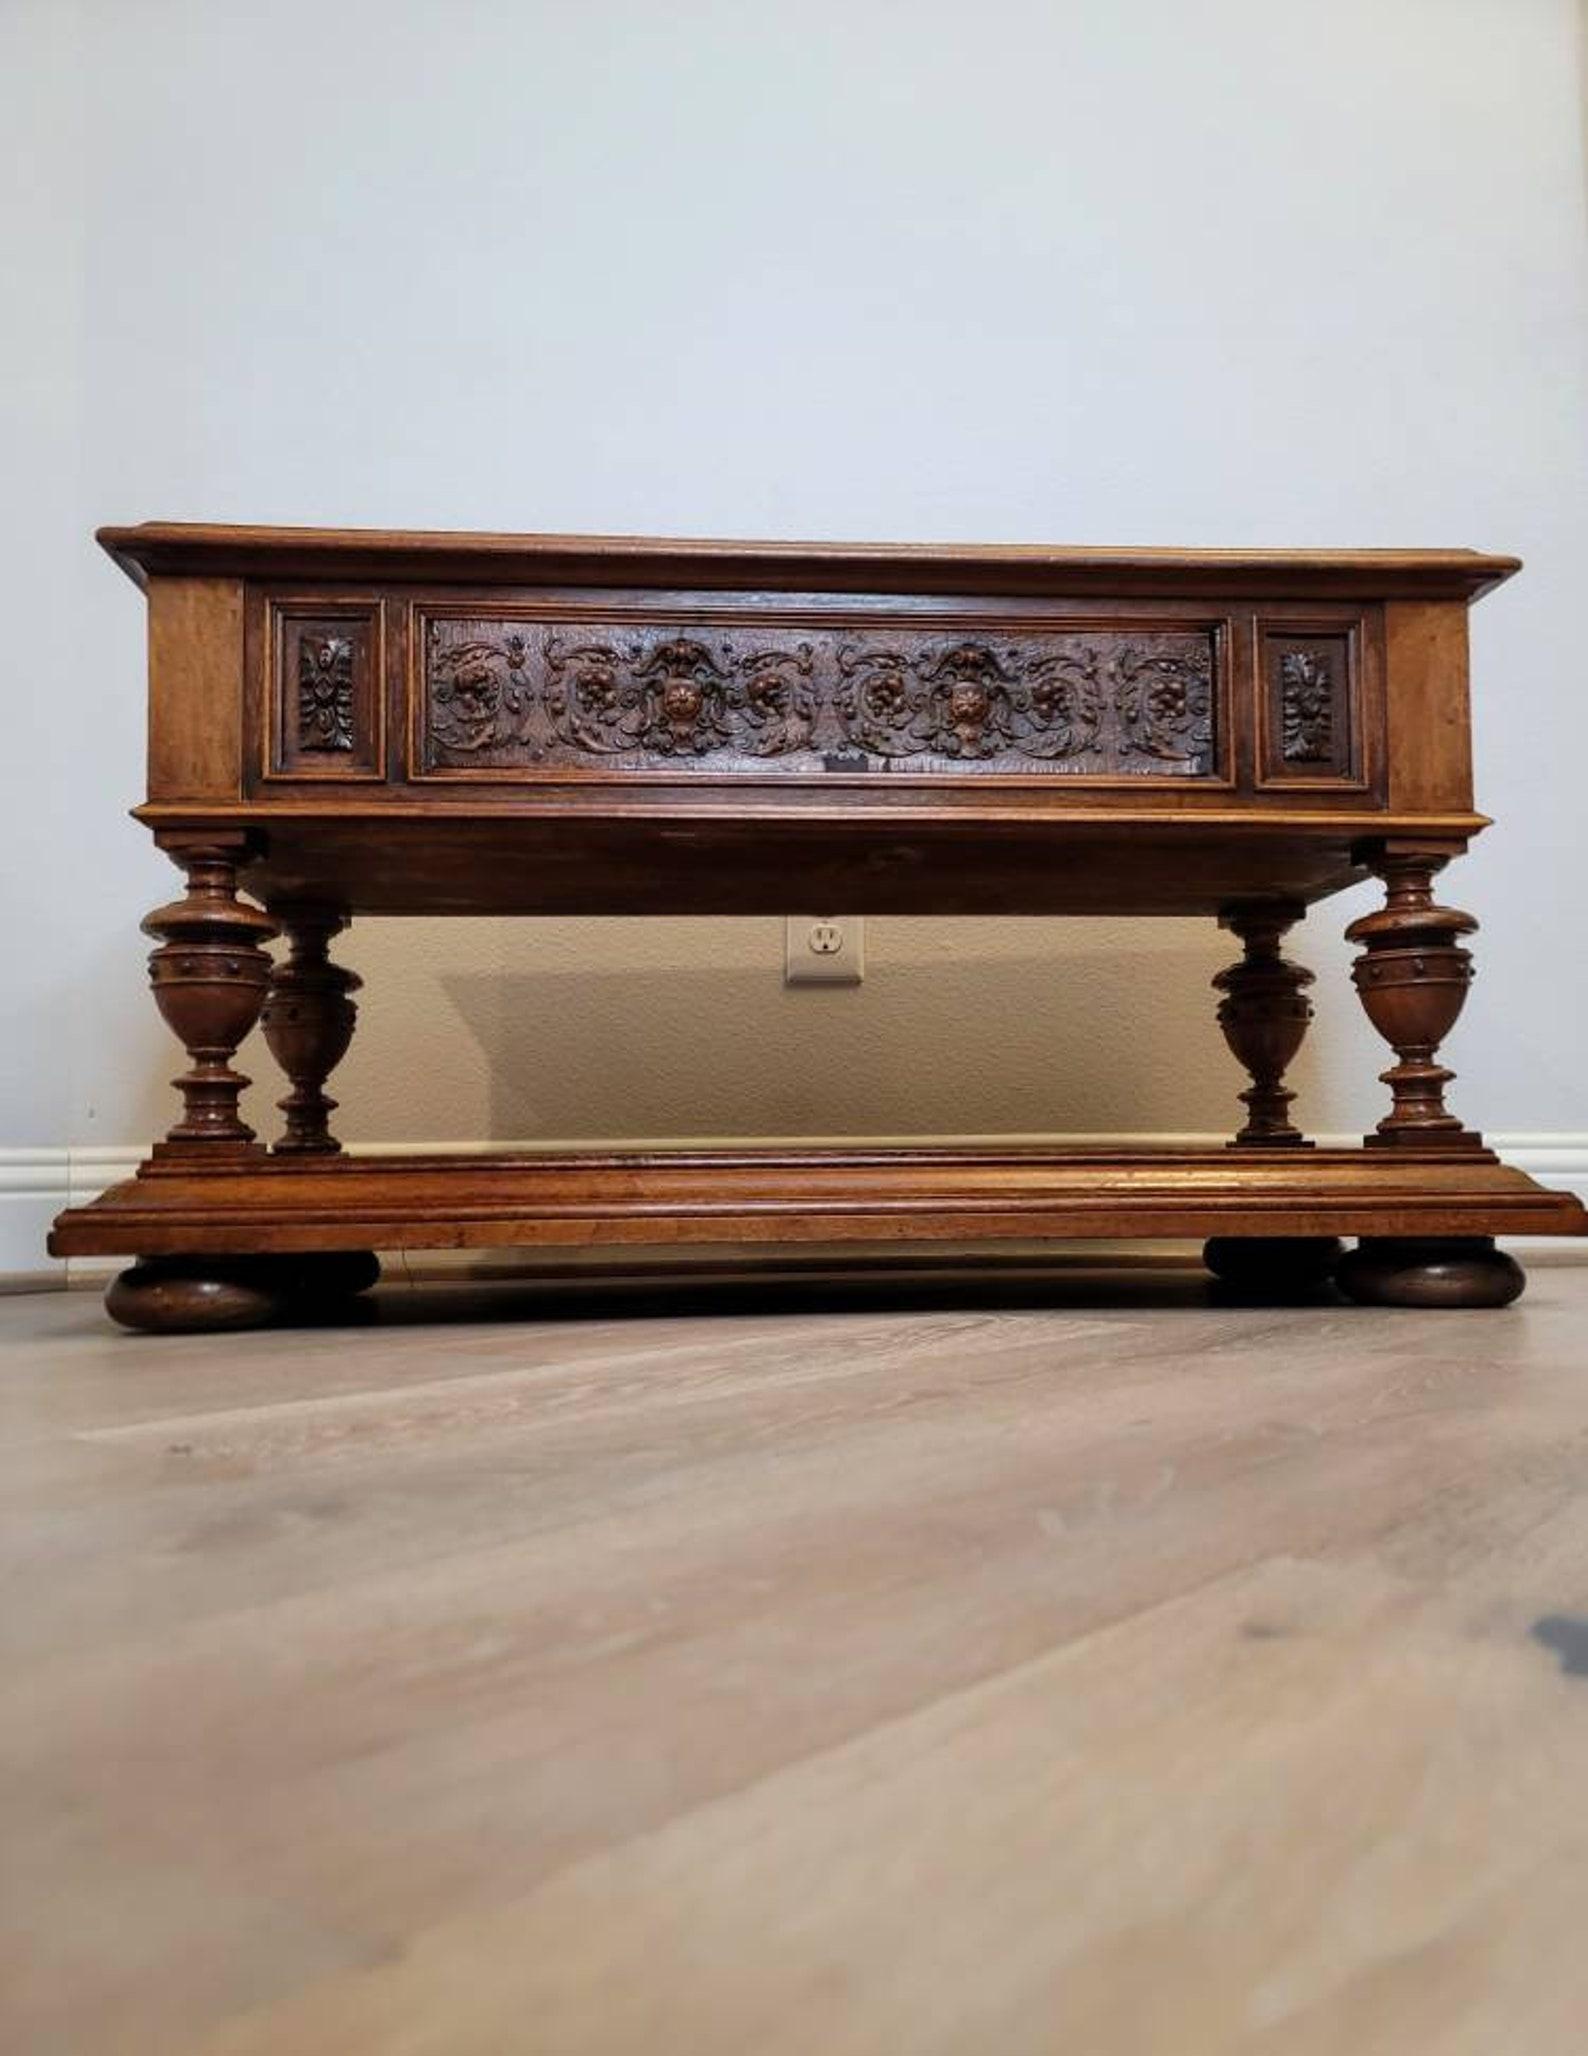 19th Century Italian Renaissance Revival Carved Jardiniere Stand In Good Condition For Sale In Forney, TX